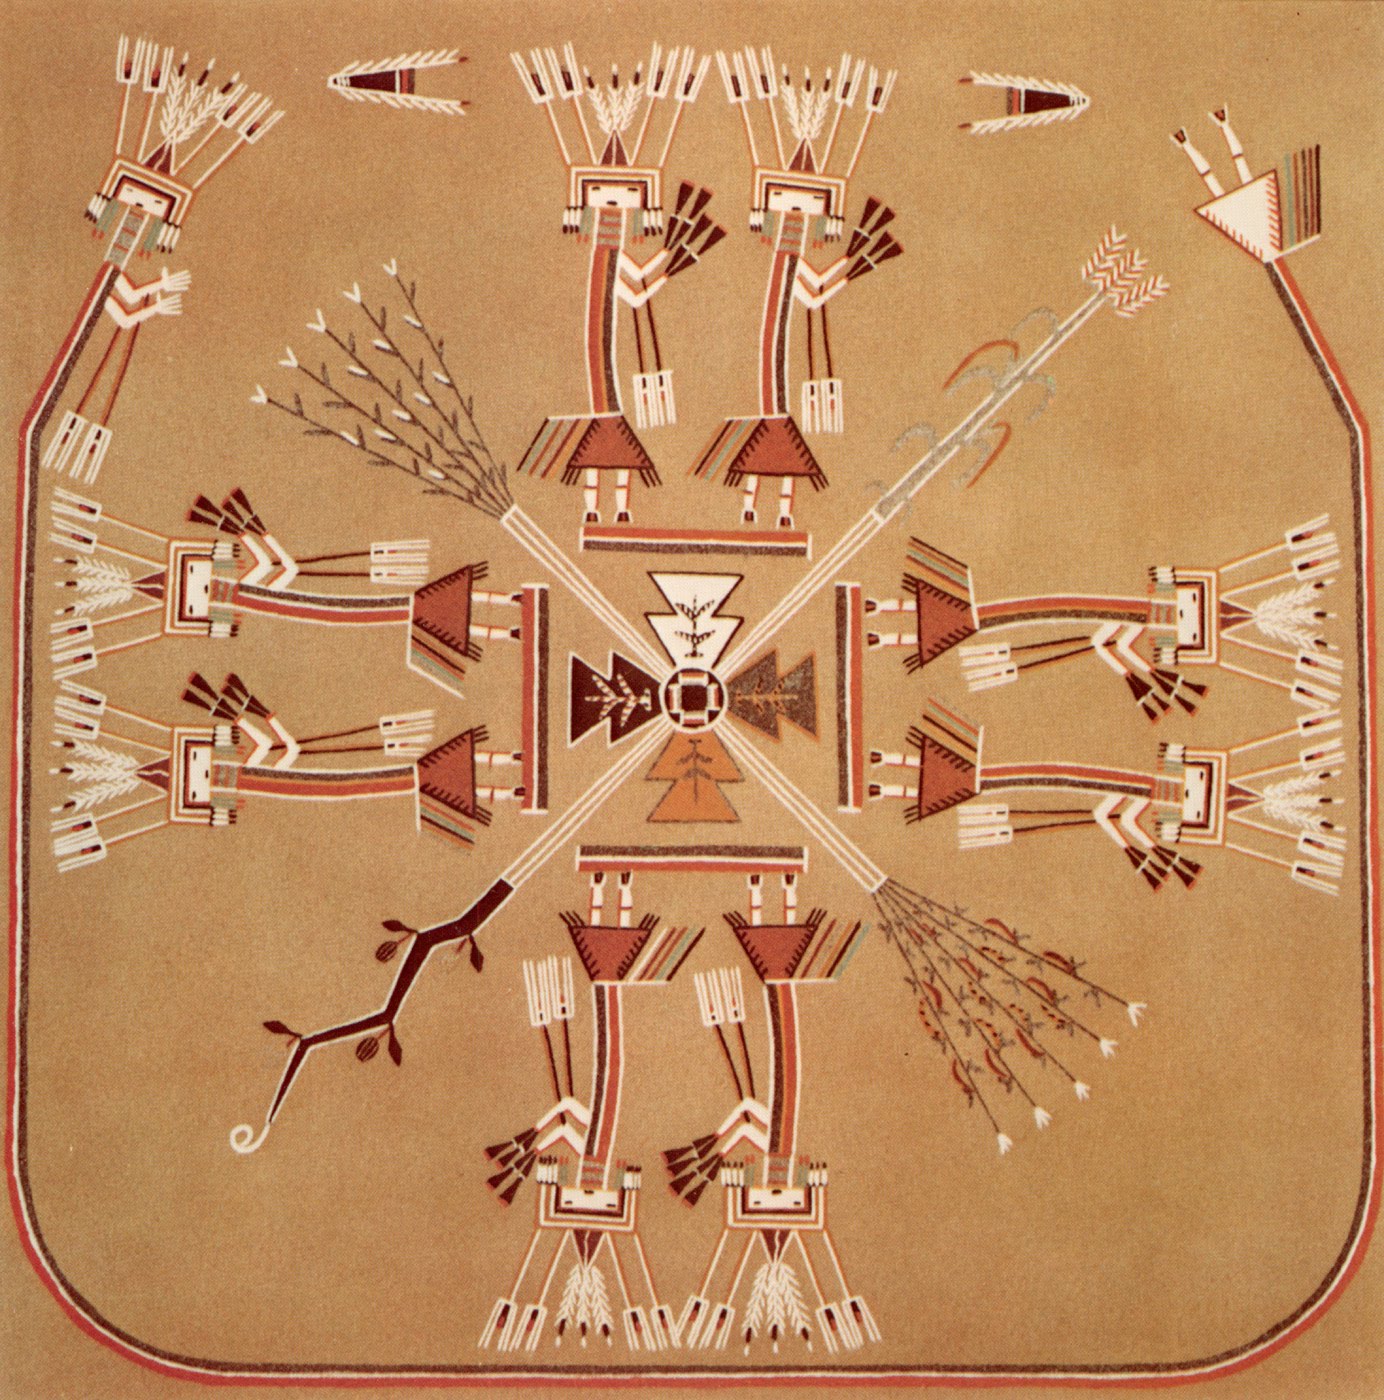 Navajo sandpainting of the Wind People, a sacred ritual.